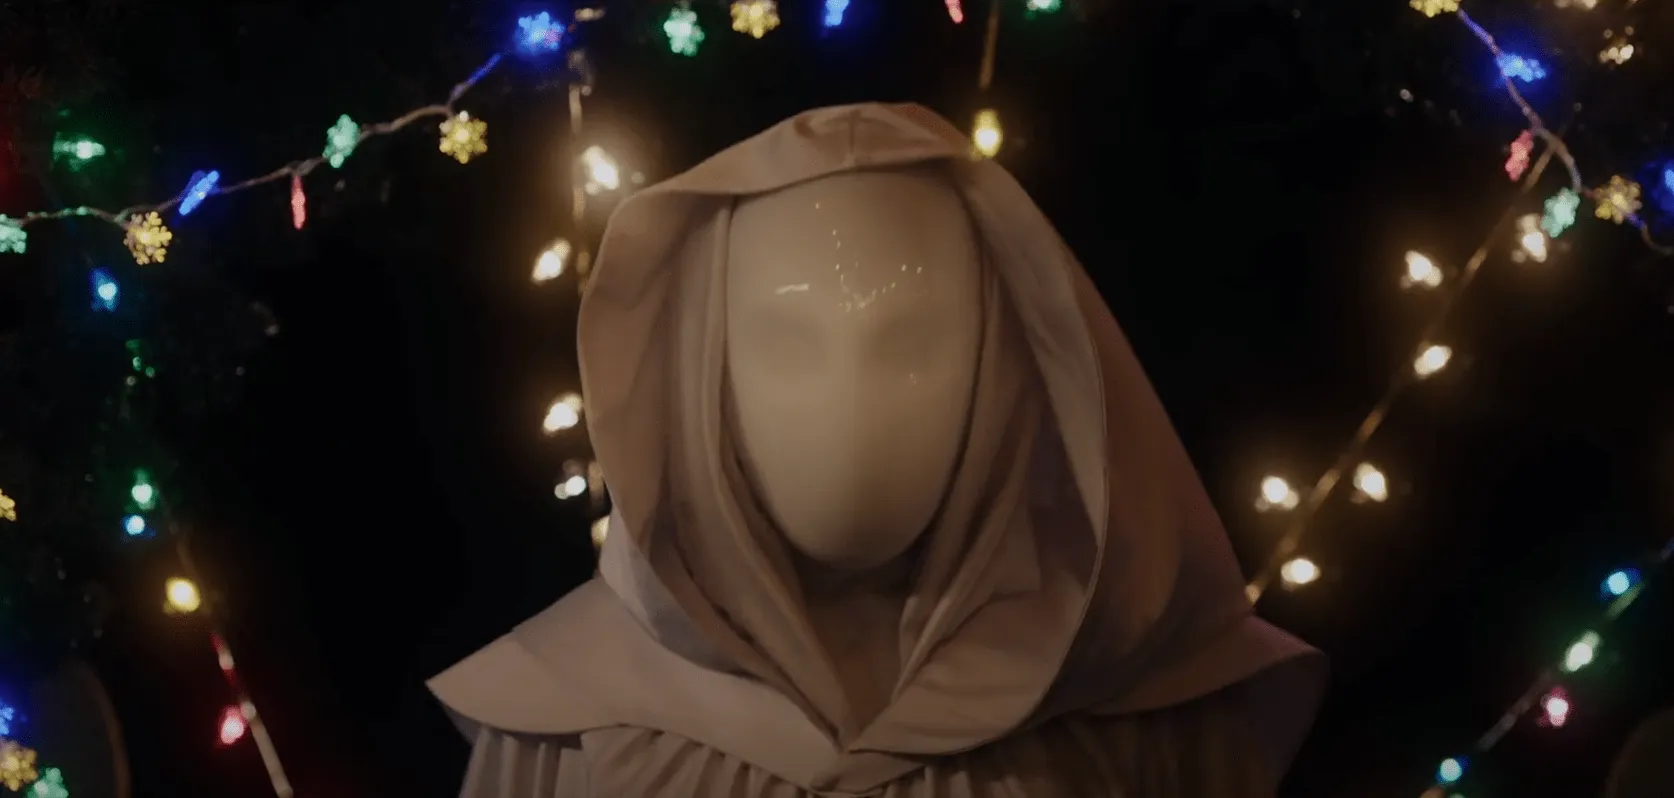 Still from It's A Wonderful Knife. A person with a white mask looks into the camera. Behind them are Christmas lights.